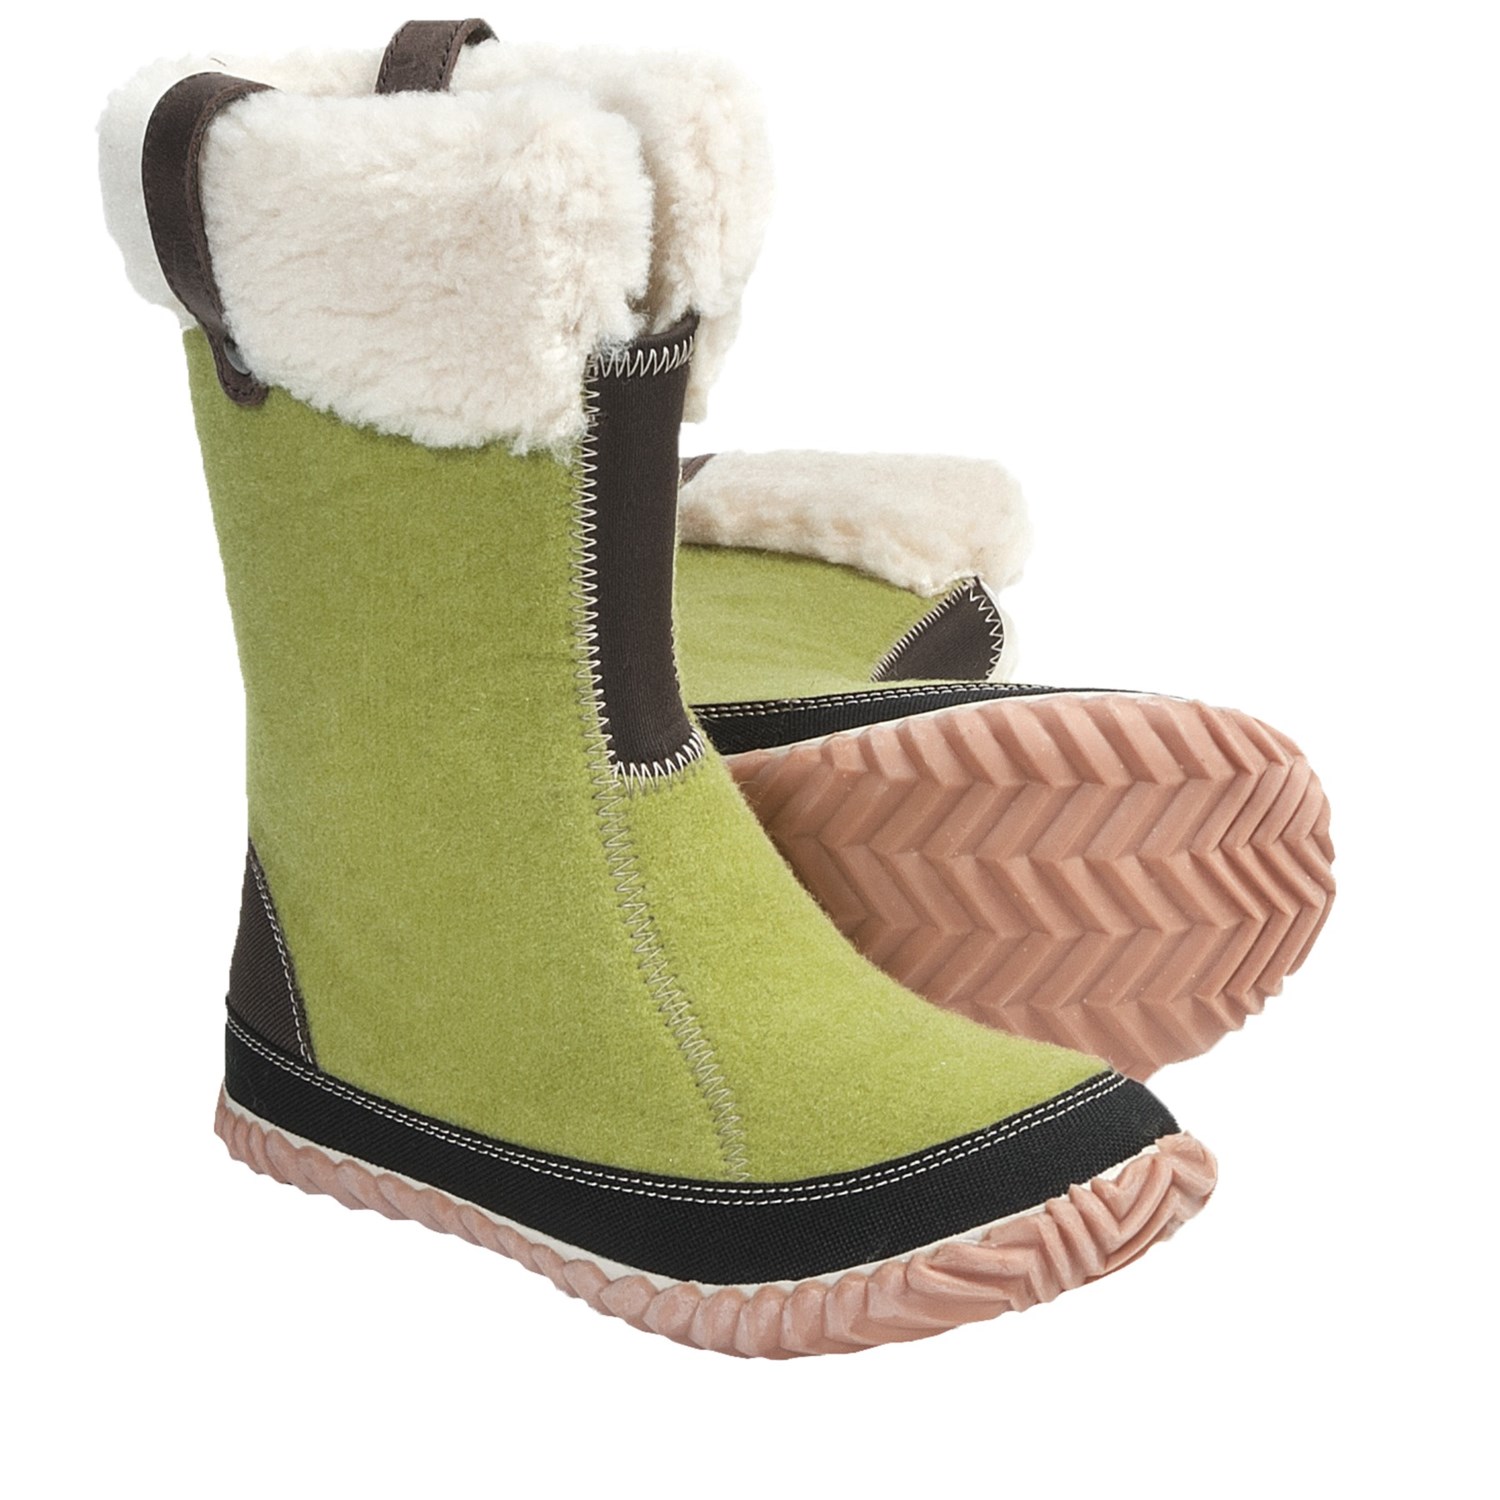 Sorel Cozy Bou Boots - Recycled Felt (For Women)